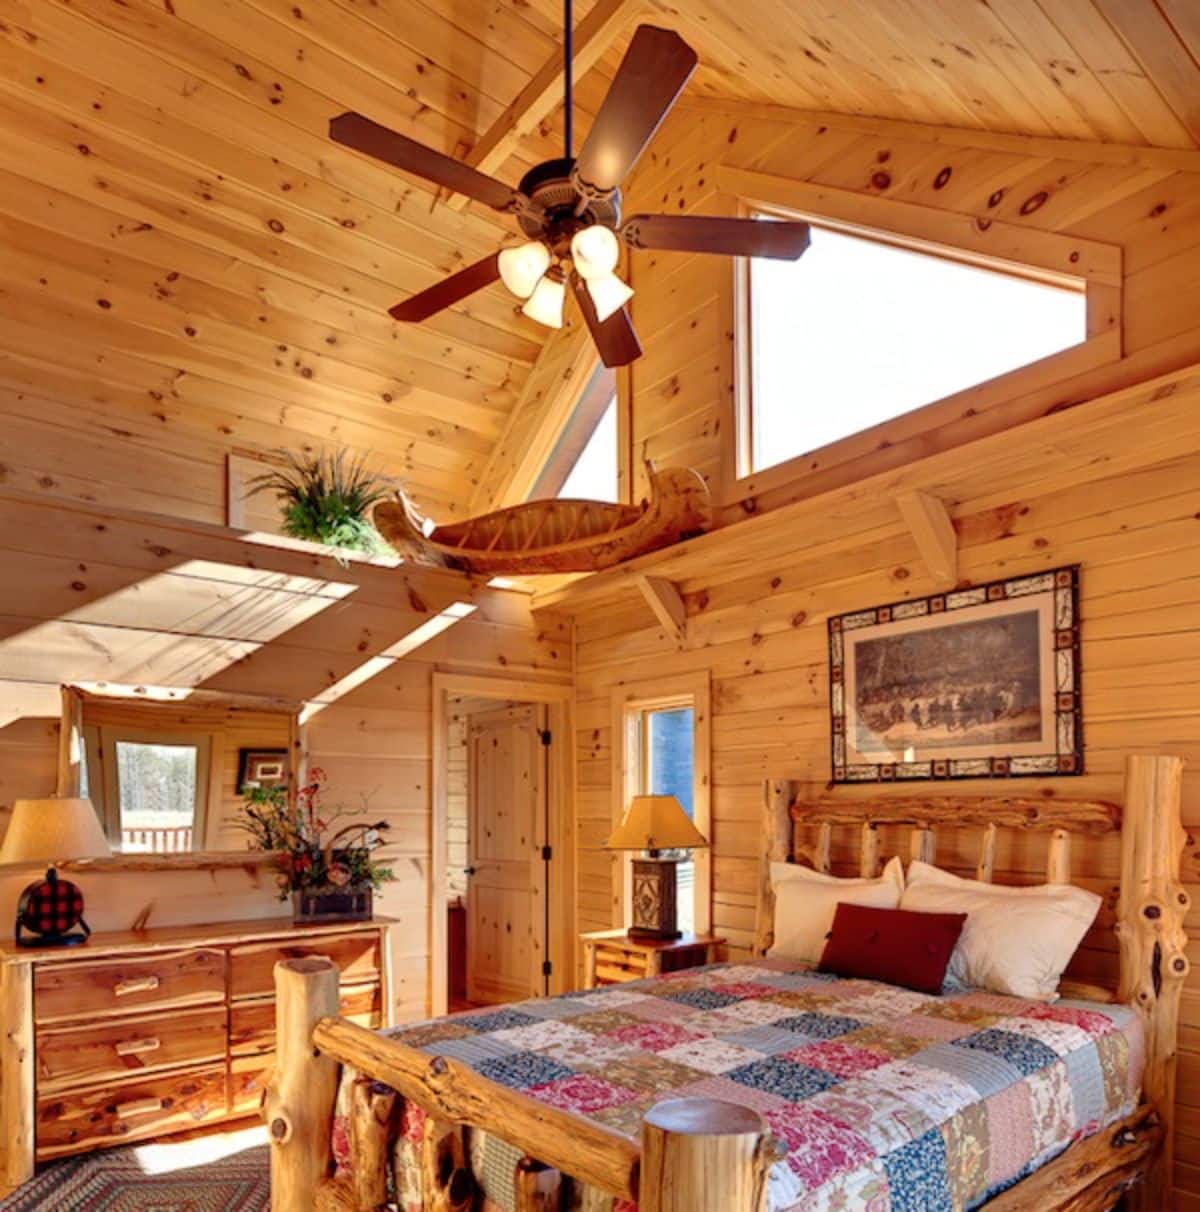 ceiling fan hanging above bed